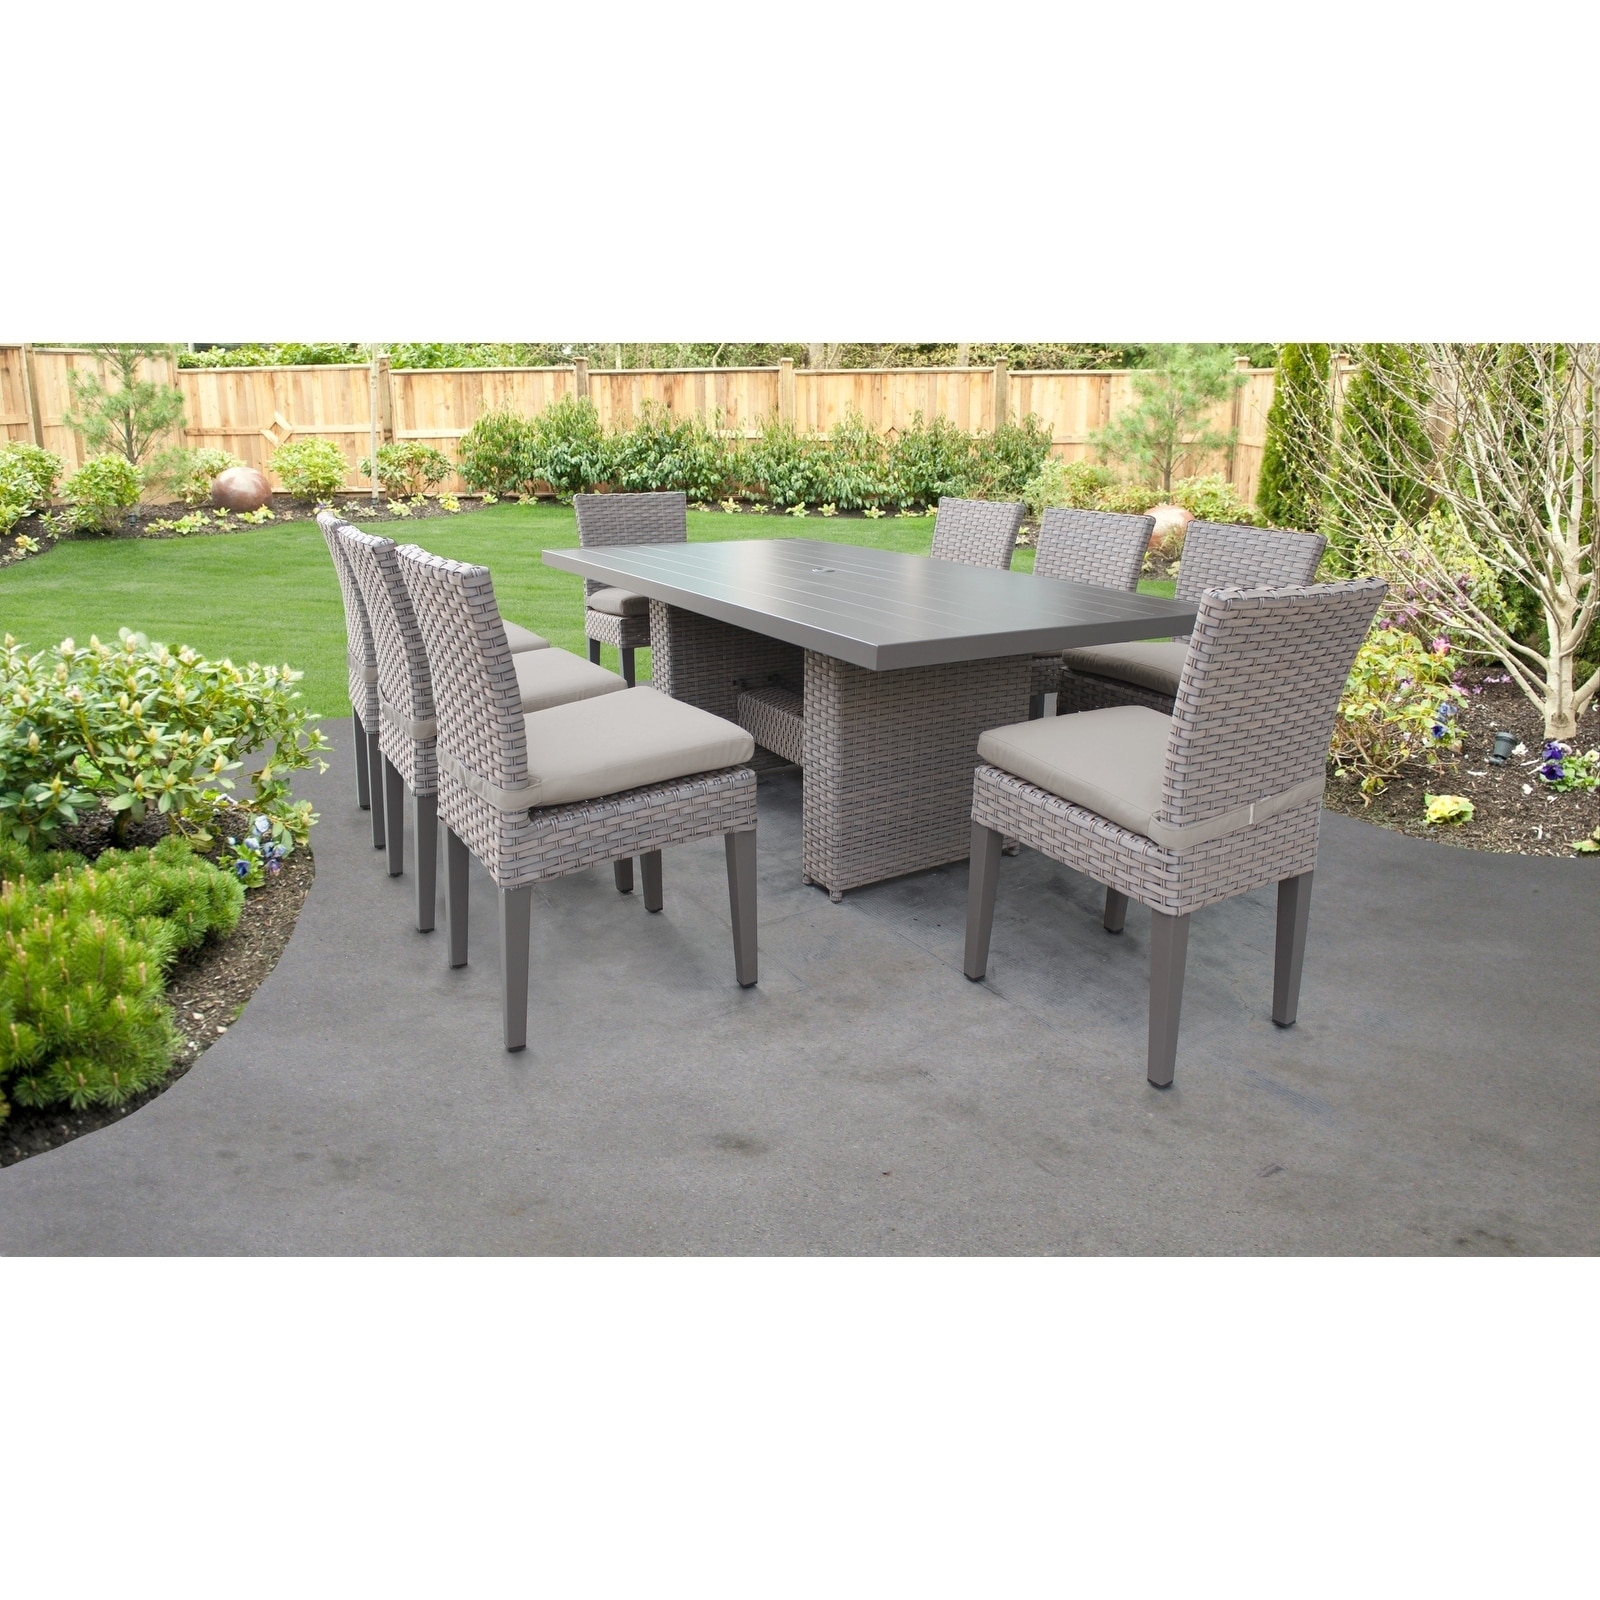 Monterey Rectangular Outdoor Patio Dining Table With 8 Armless Chairs